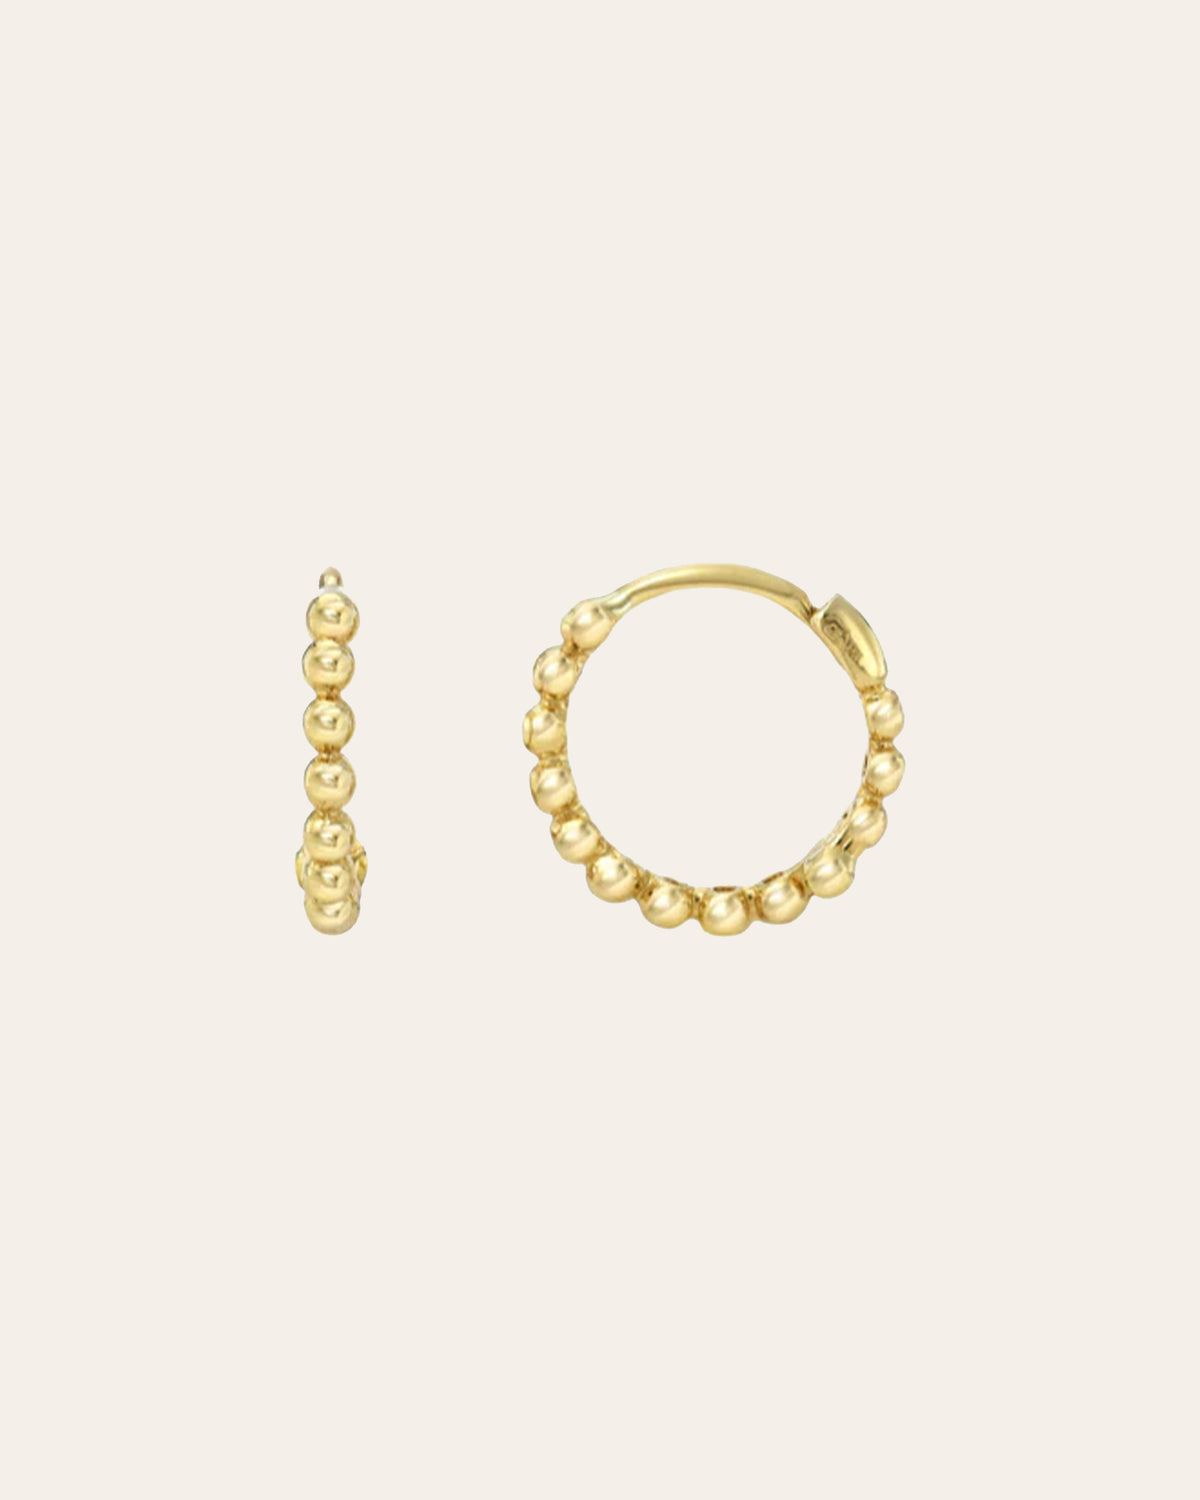 14K Gold Bead Huggie Earrings - Out of Stock